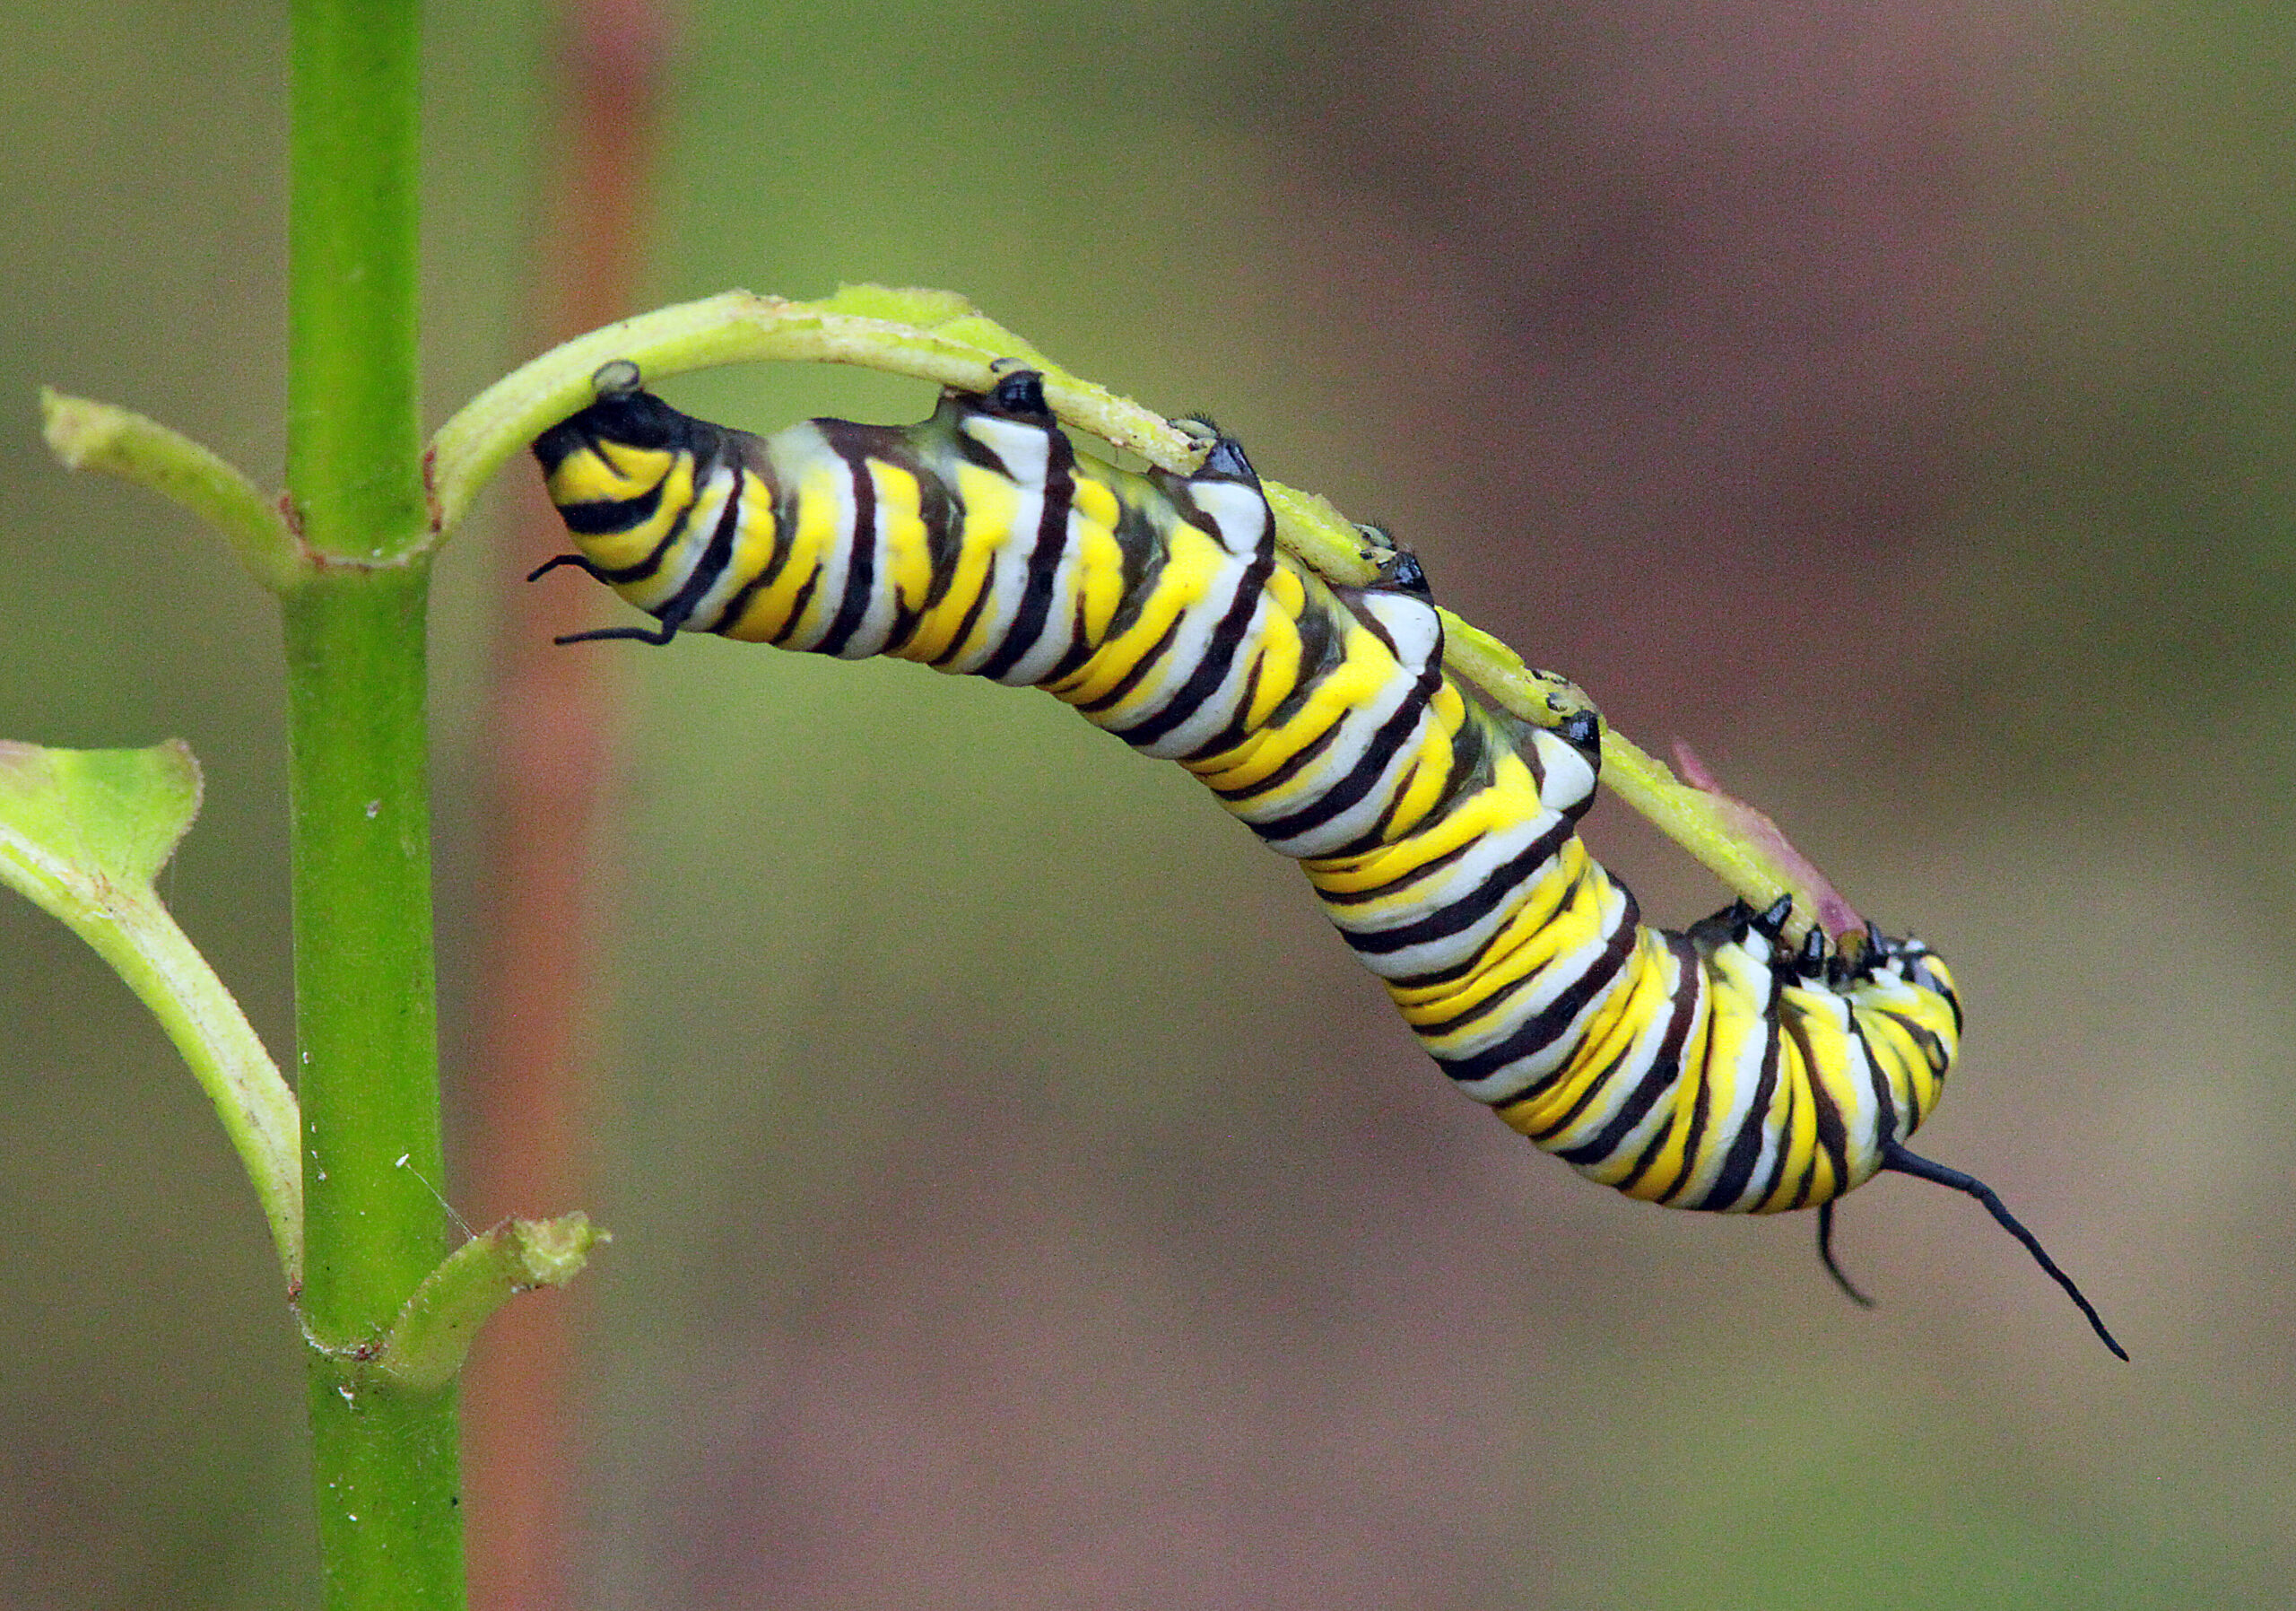 A black, white, and yellow-striped caterpillar hangs upside down on a plant stem.